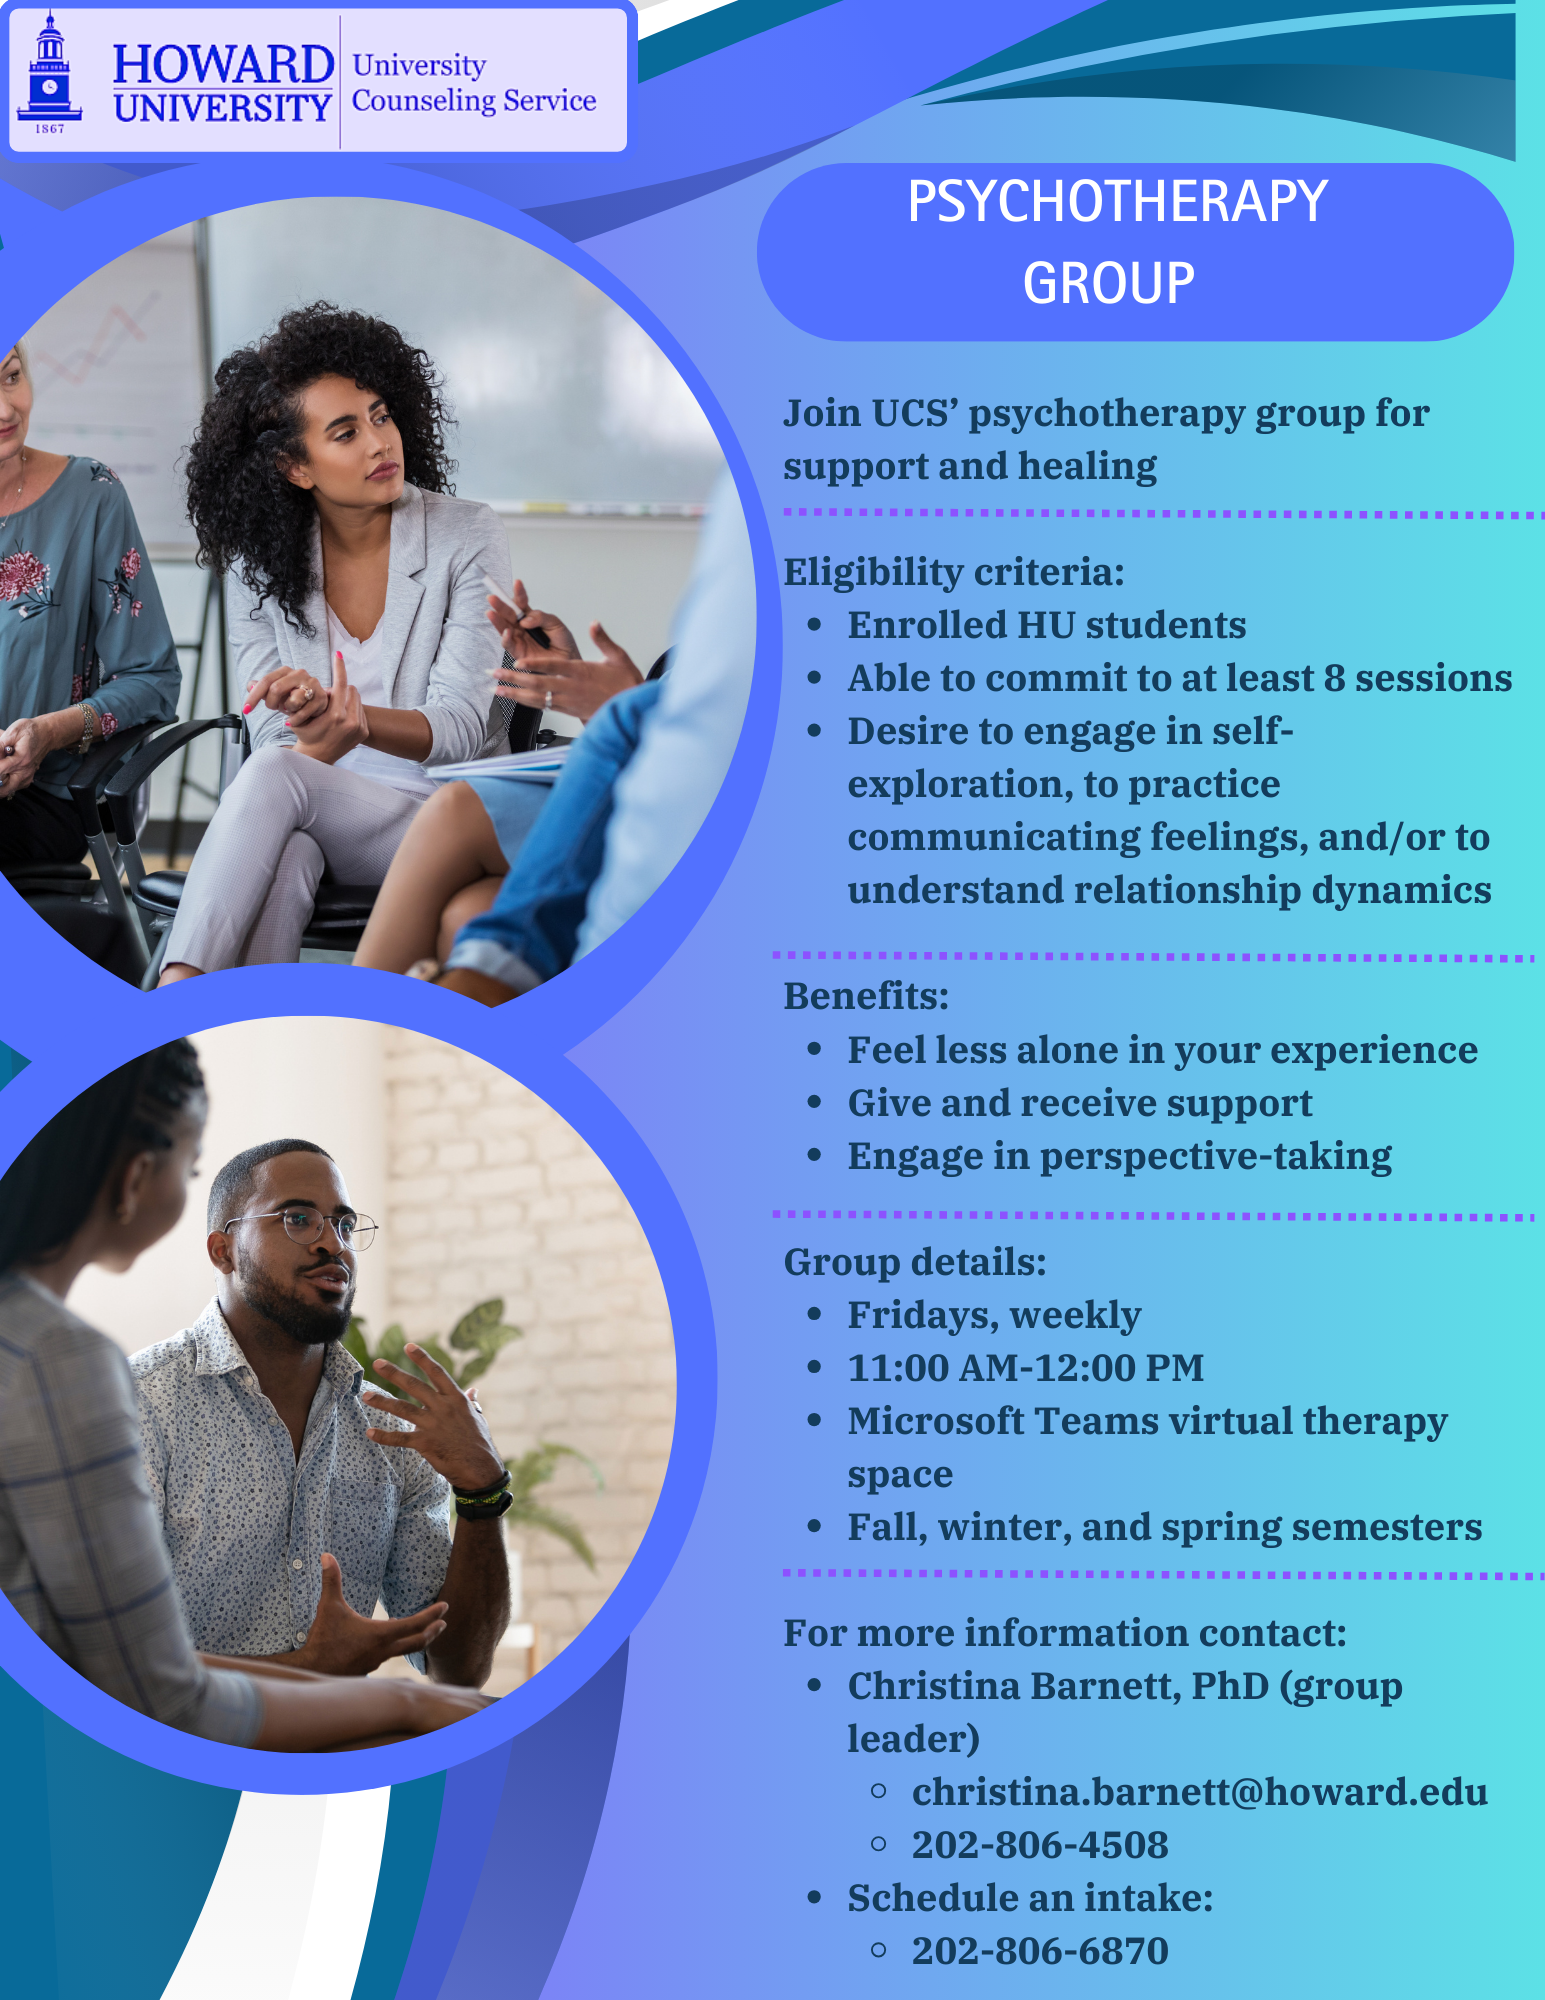 Group Therapy Flyer